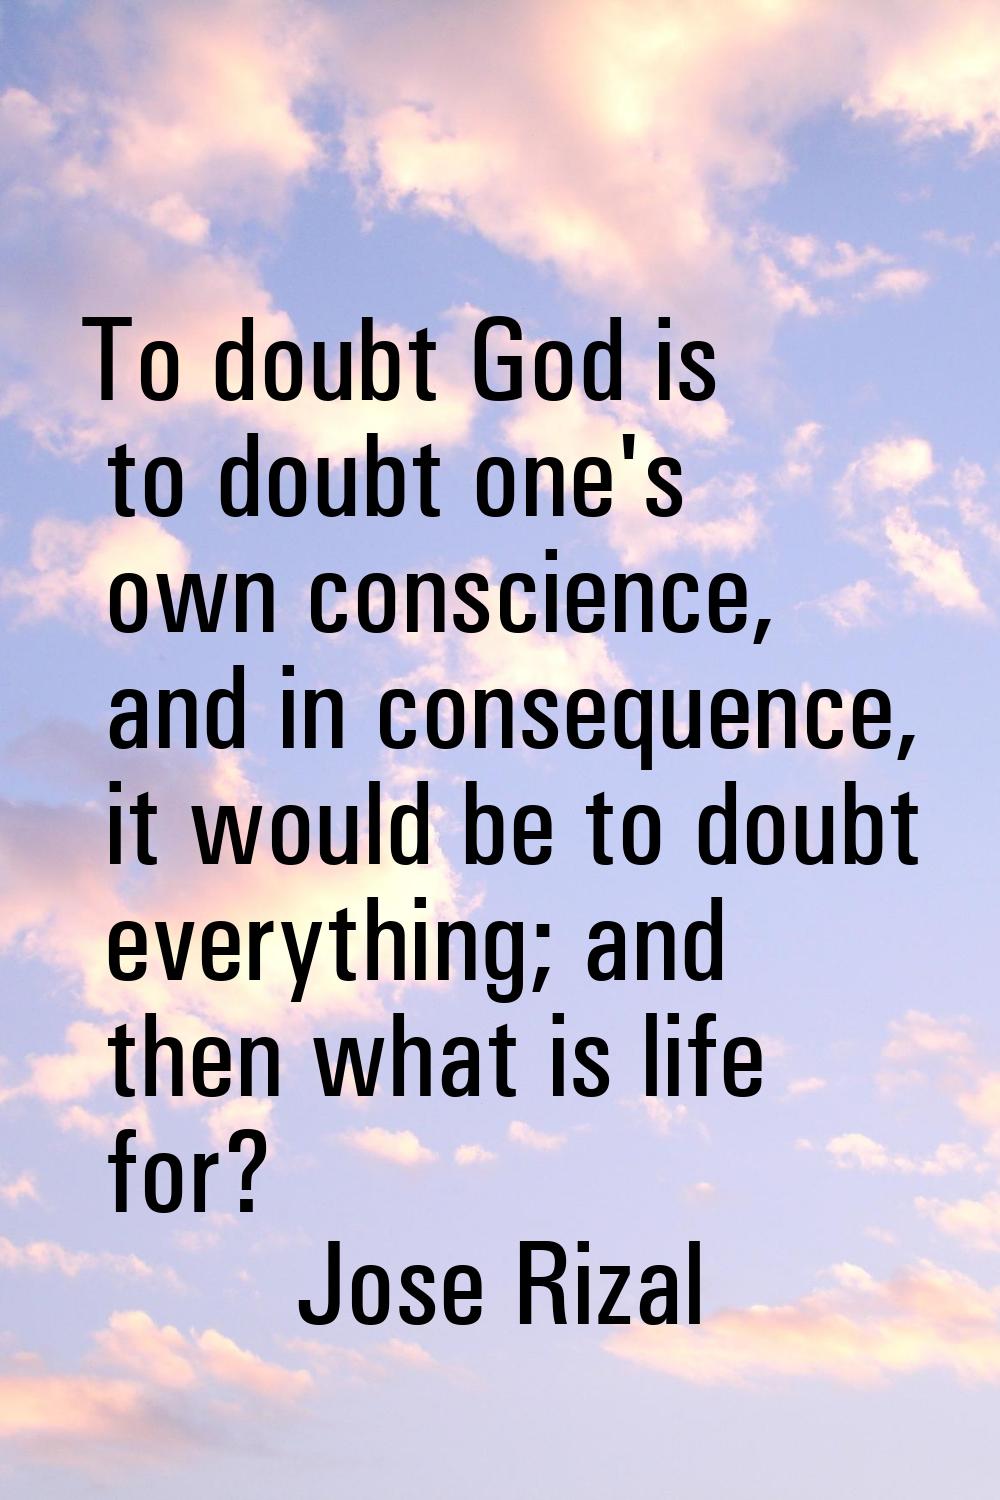 To doubt God is to doubt one's own conscience, and in consequence, it would be to doubt everything;